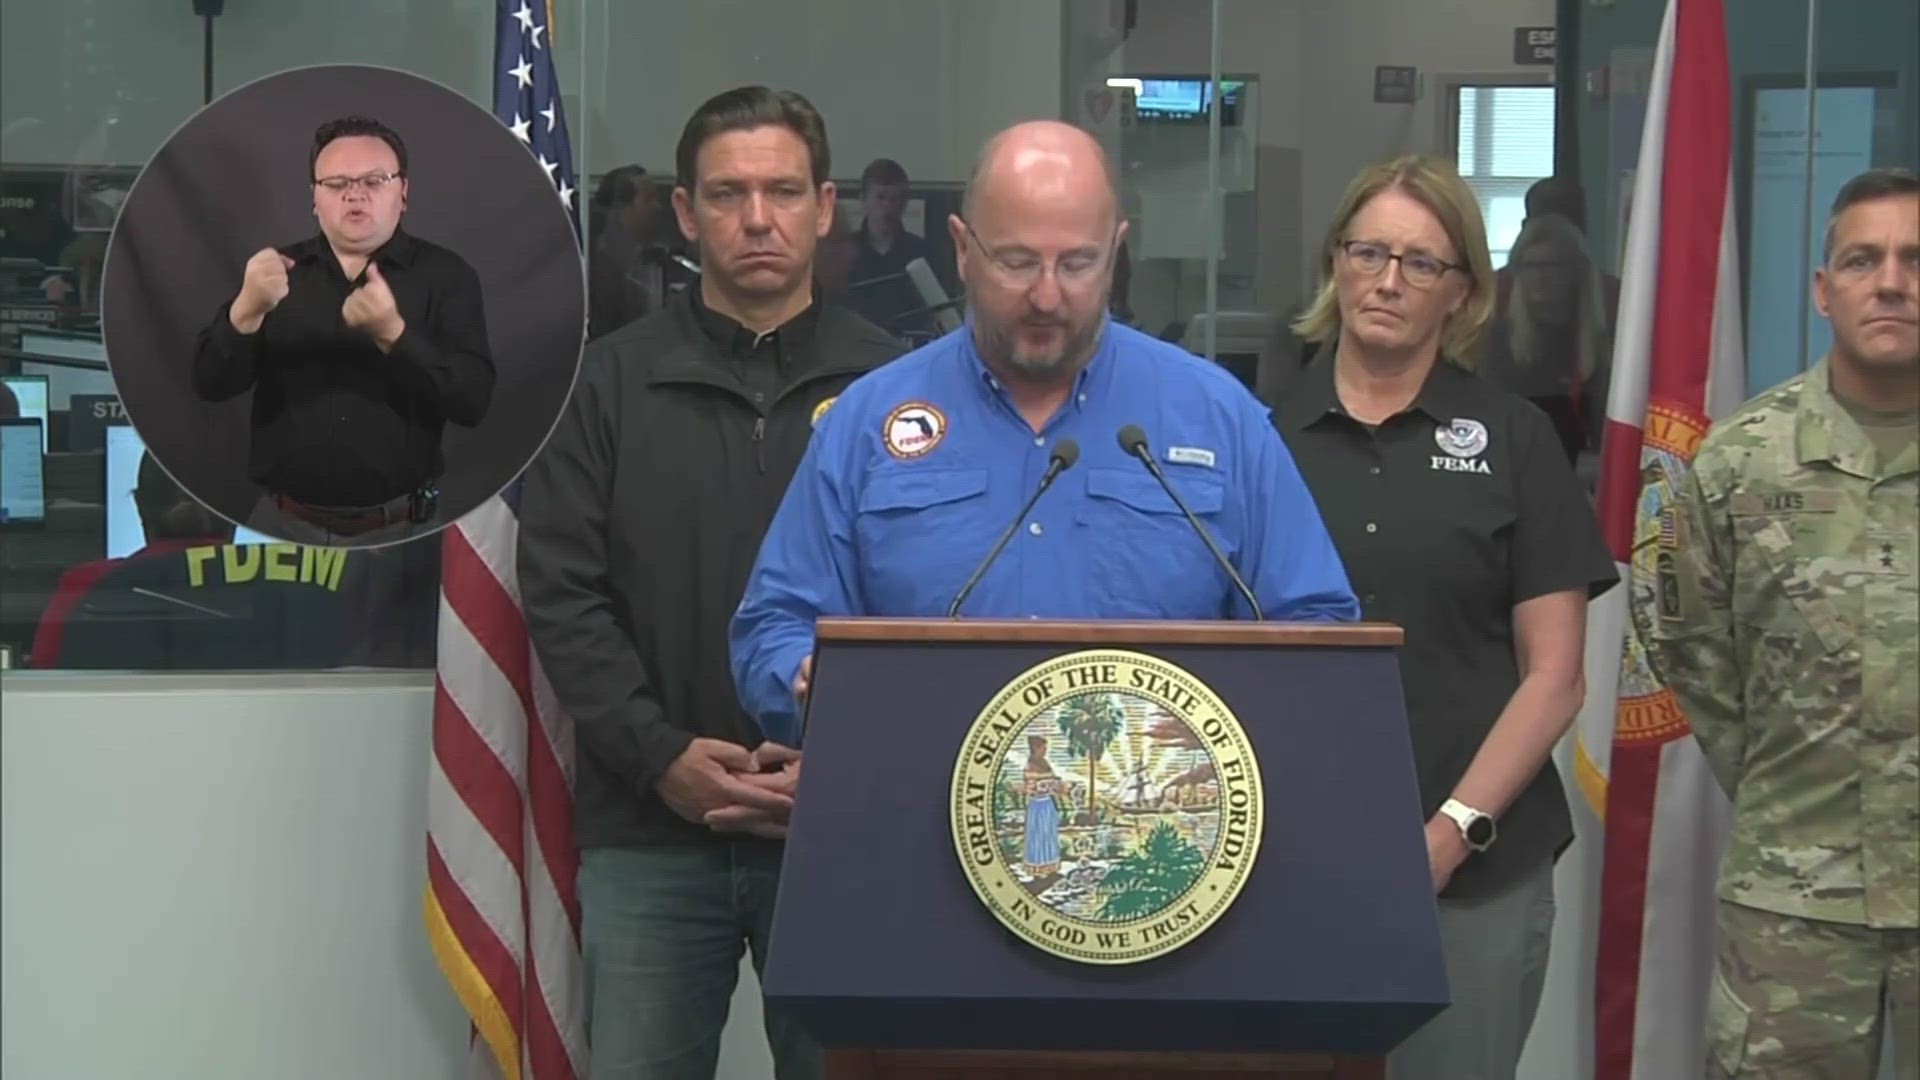 Florida officials said at this time no deaths have been reported, crediting evacuation orders and the people who listened to them.